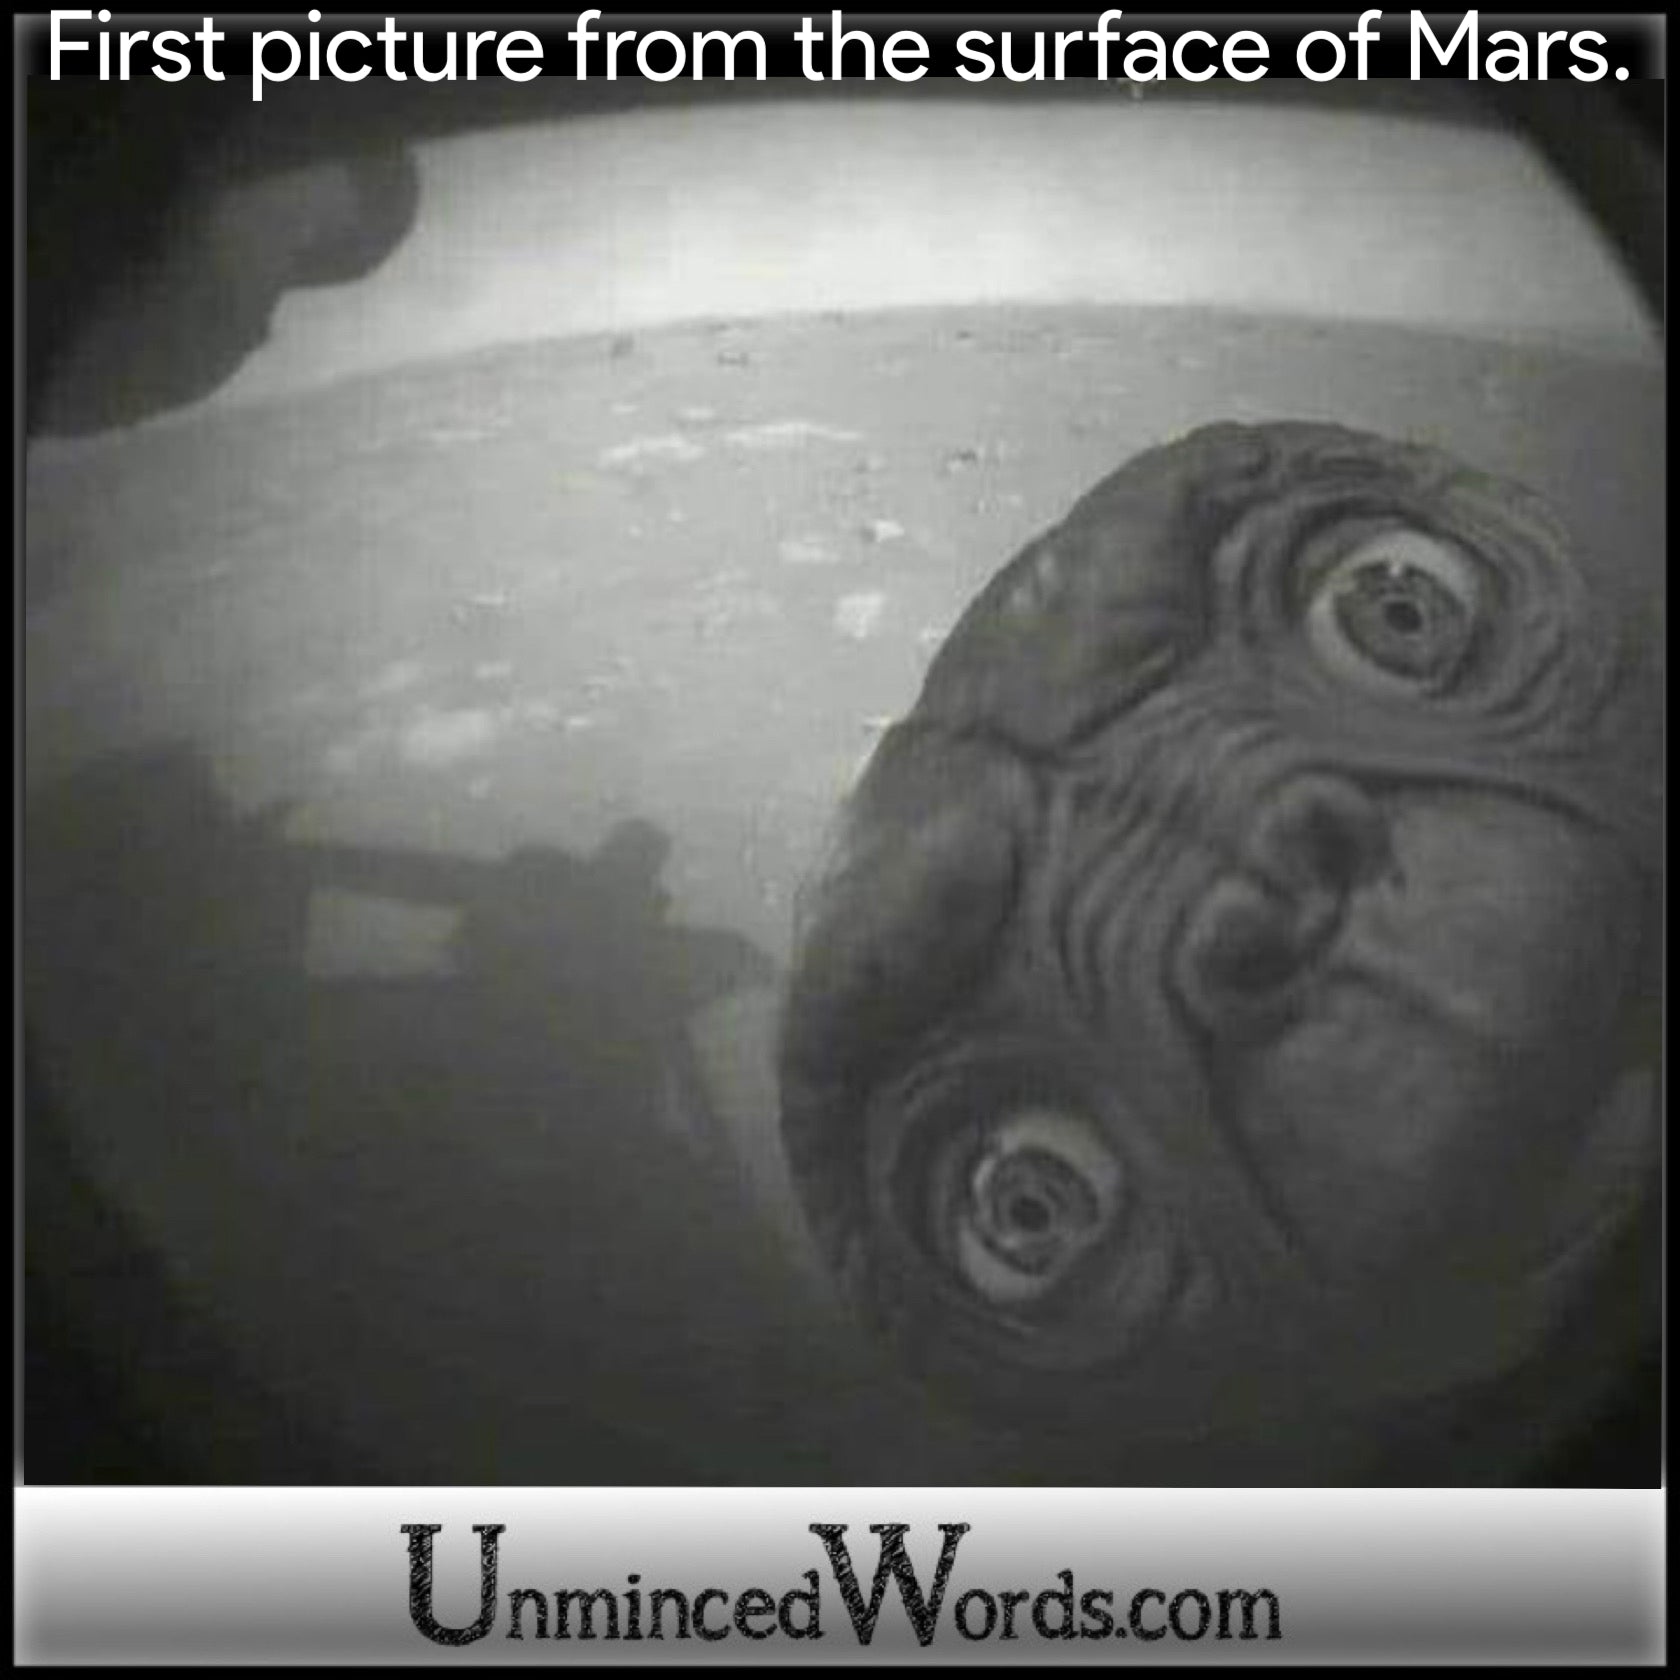 First picture from the surface of Mars.